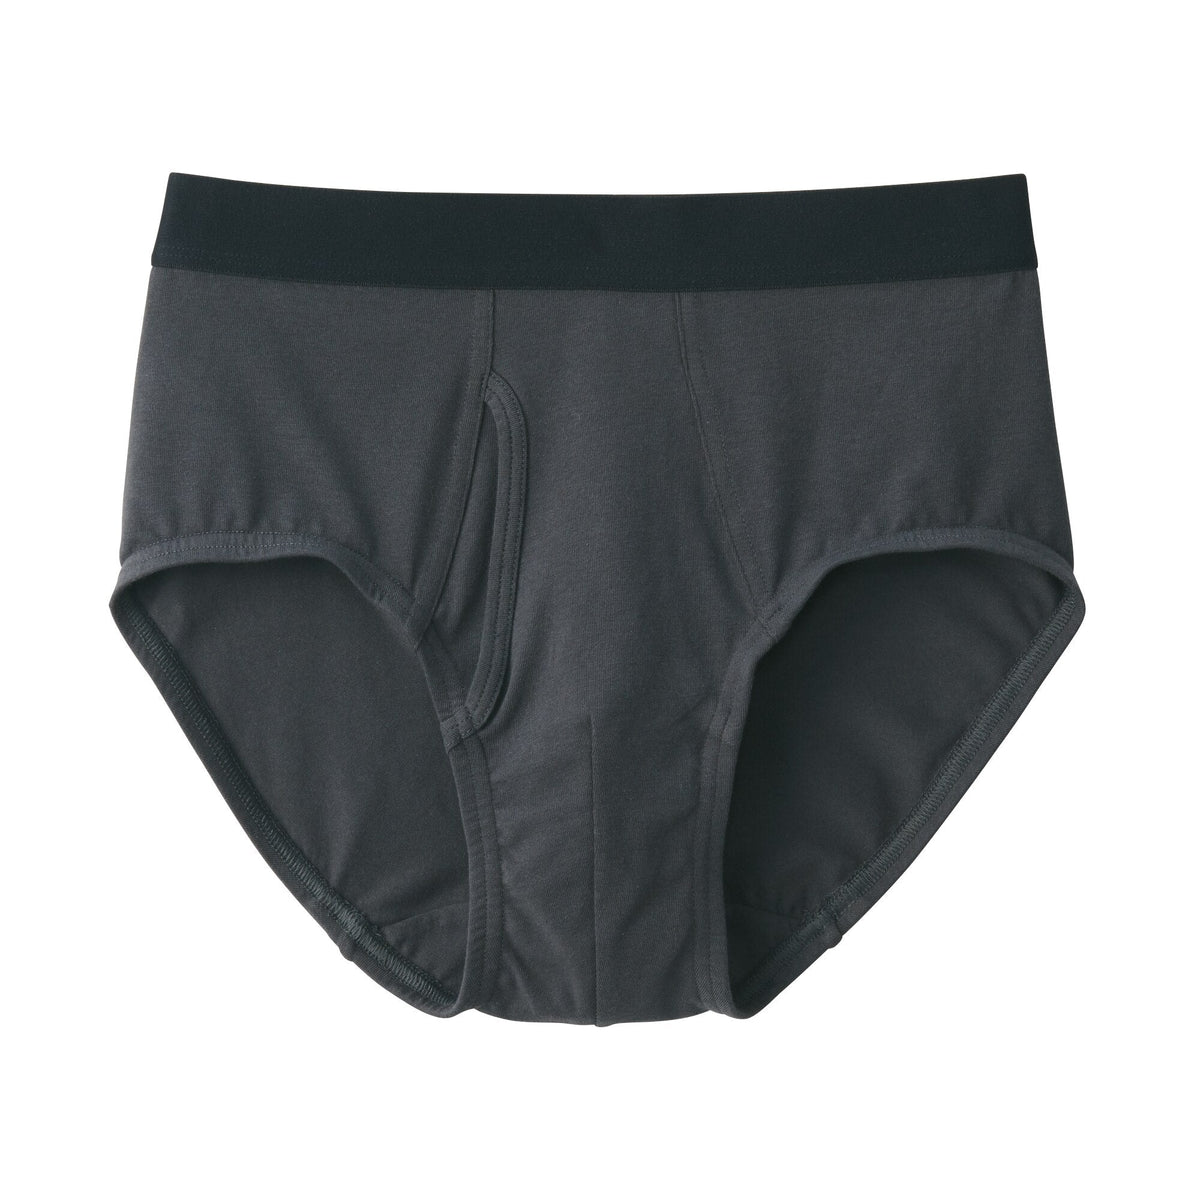 I've Replaced All My Underwear With These 2-for-$13 Muji Boy Shorts